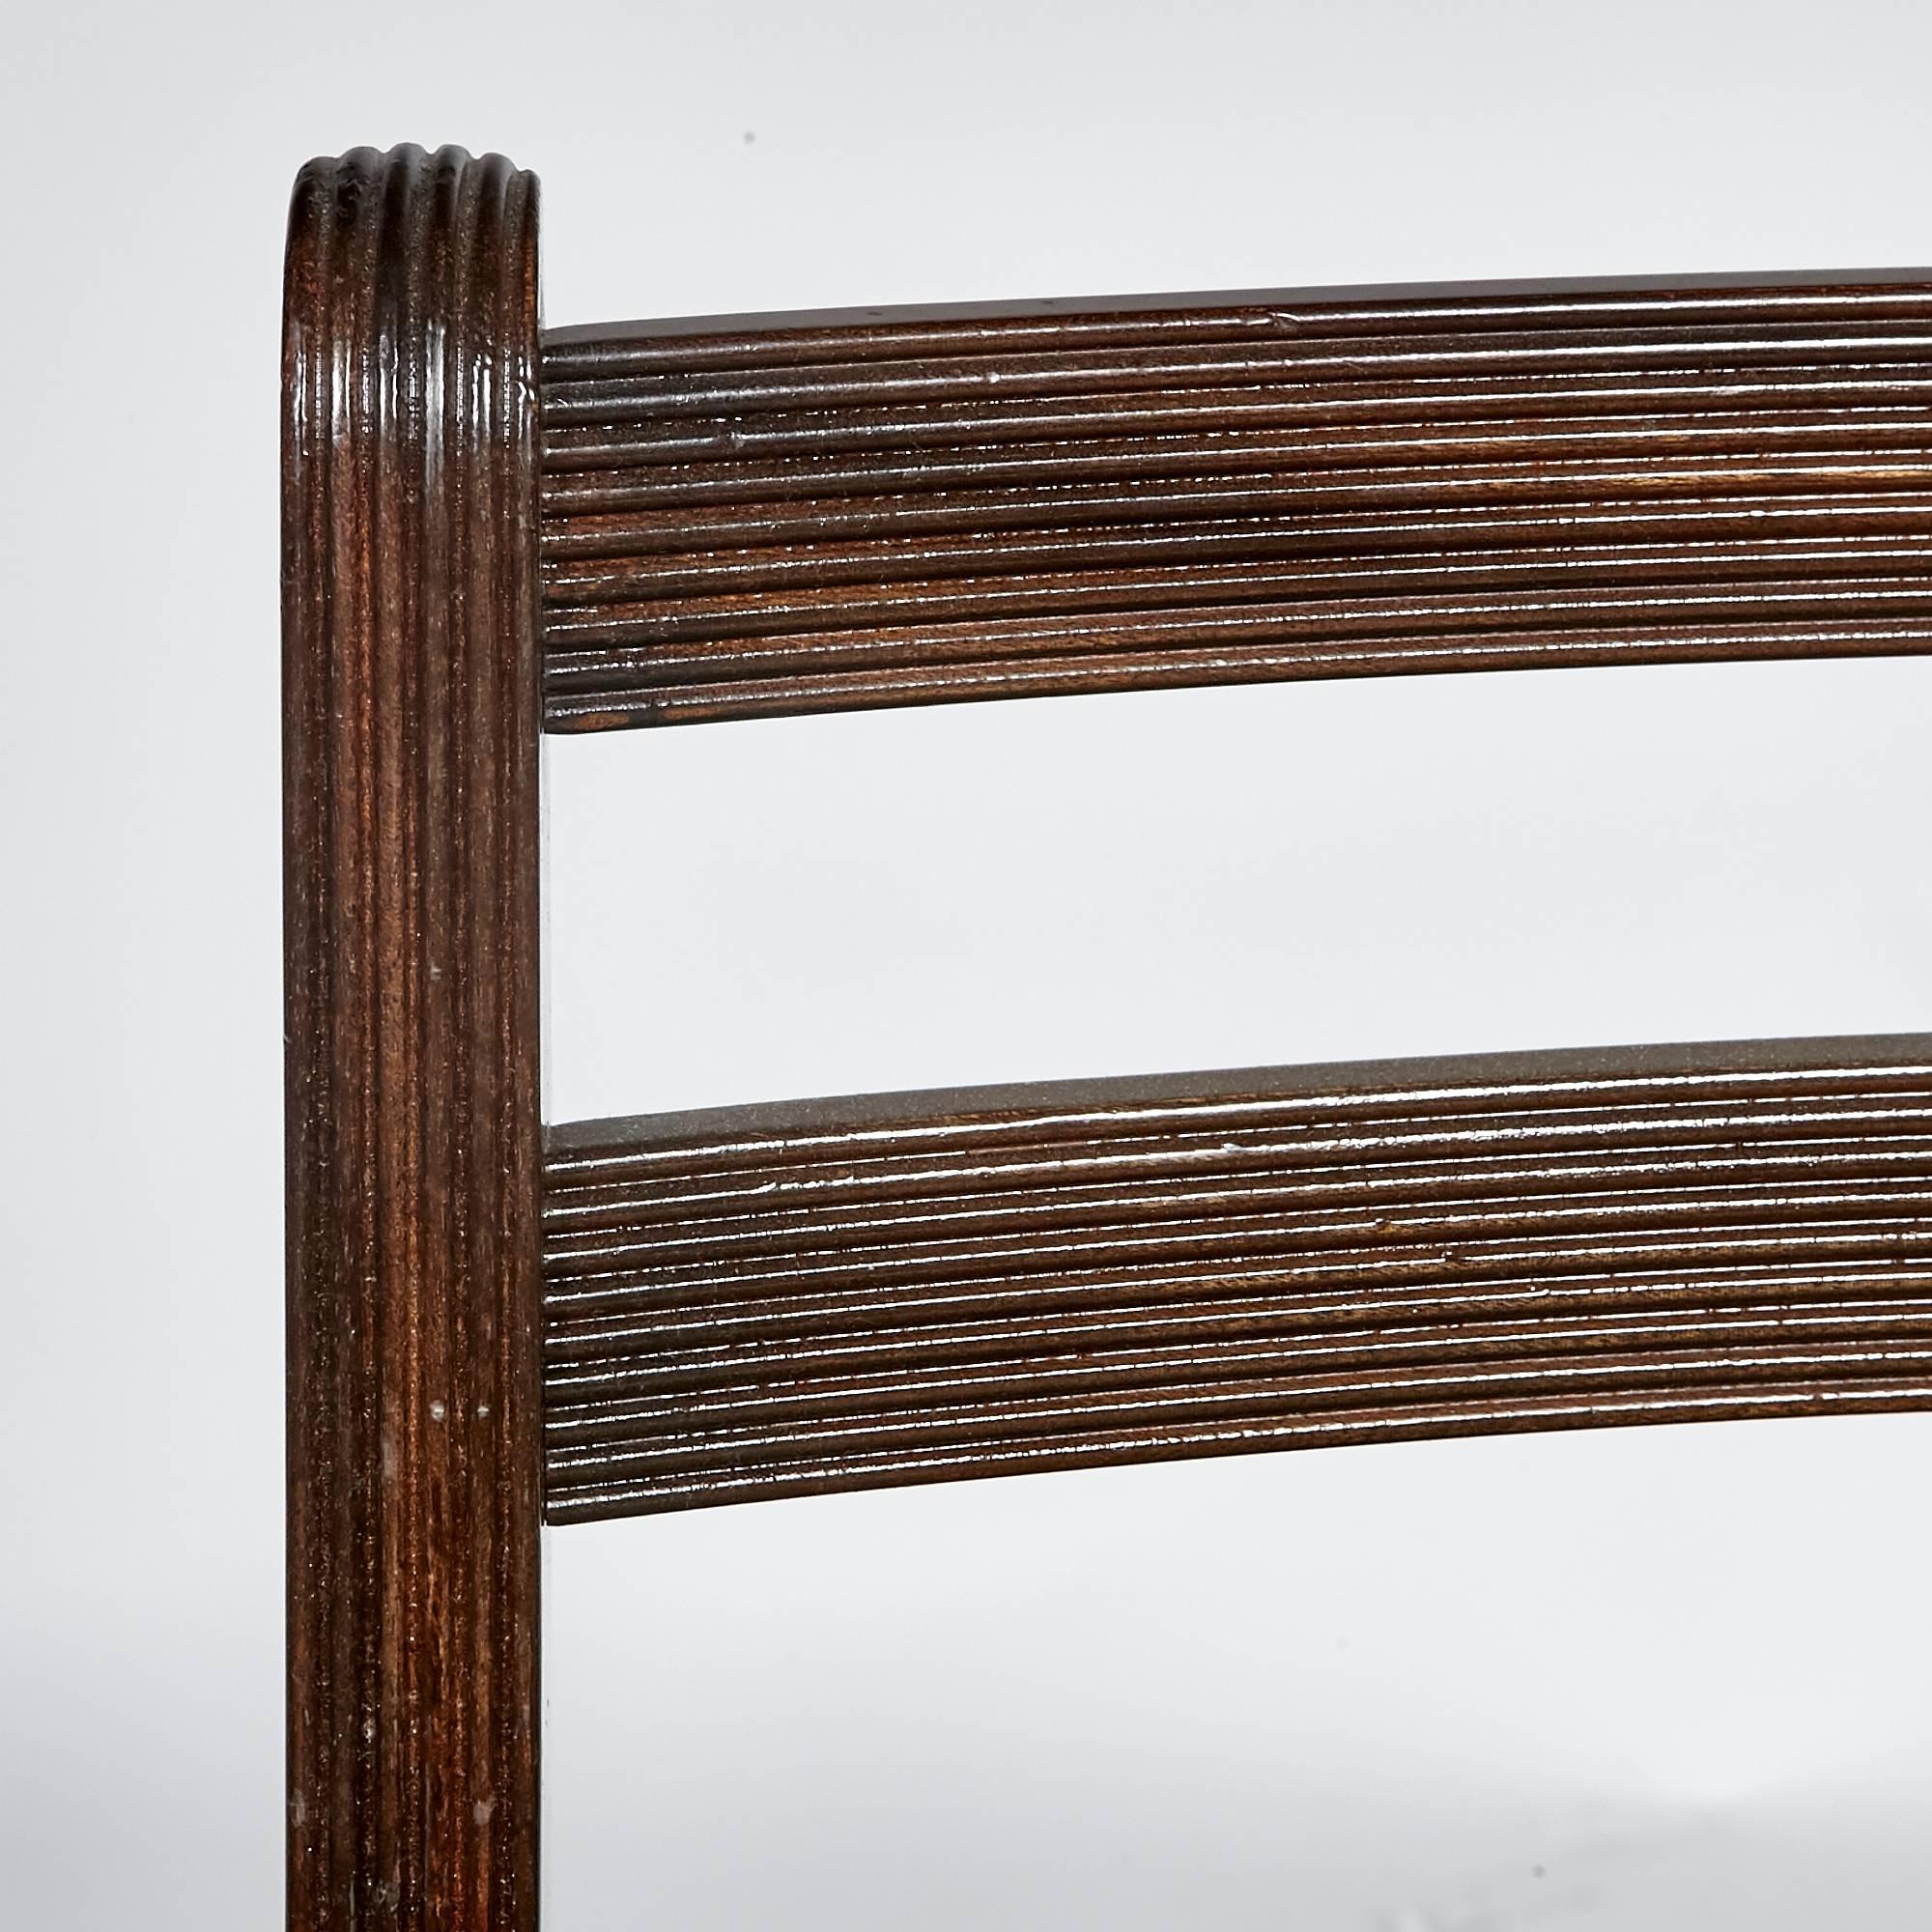 Danish Mahogany Dining Chairs by Ole Wanscher for Poul Jeppesen, 1960s In Excellent Condition For Sale In Amherst, NH